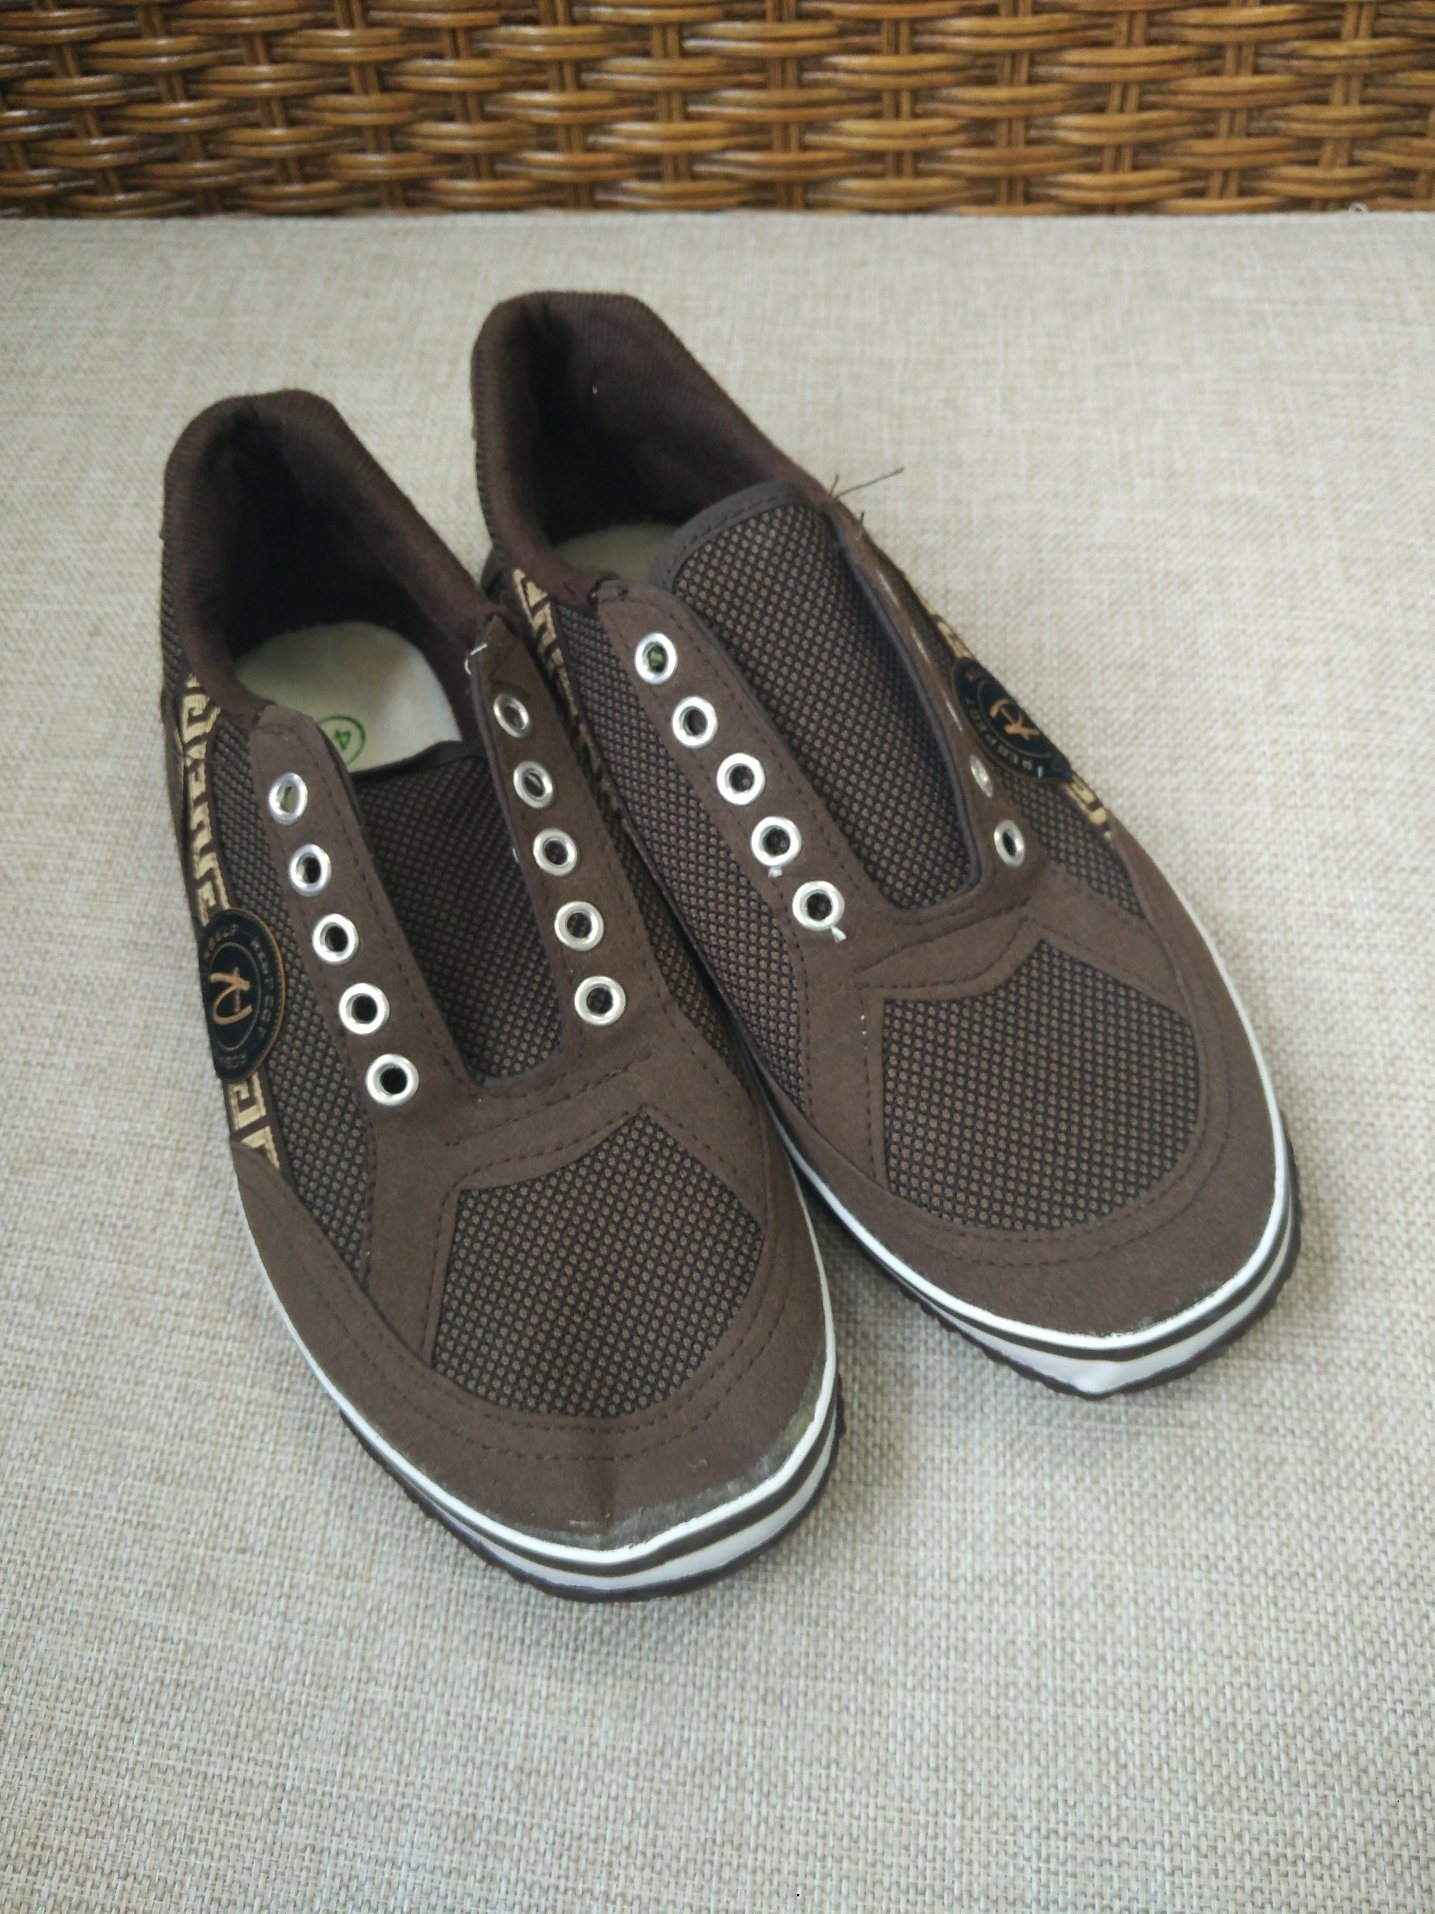 Casual and Comfortable Canvas Shoes Rubber Sole for Unisex